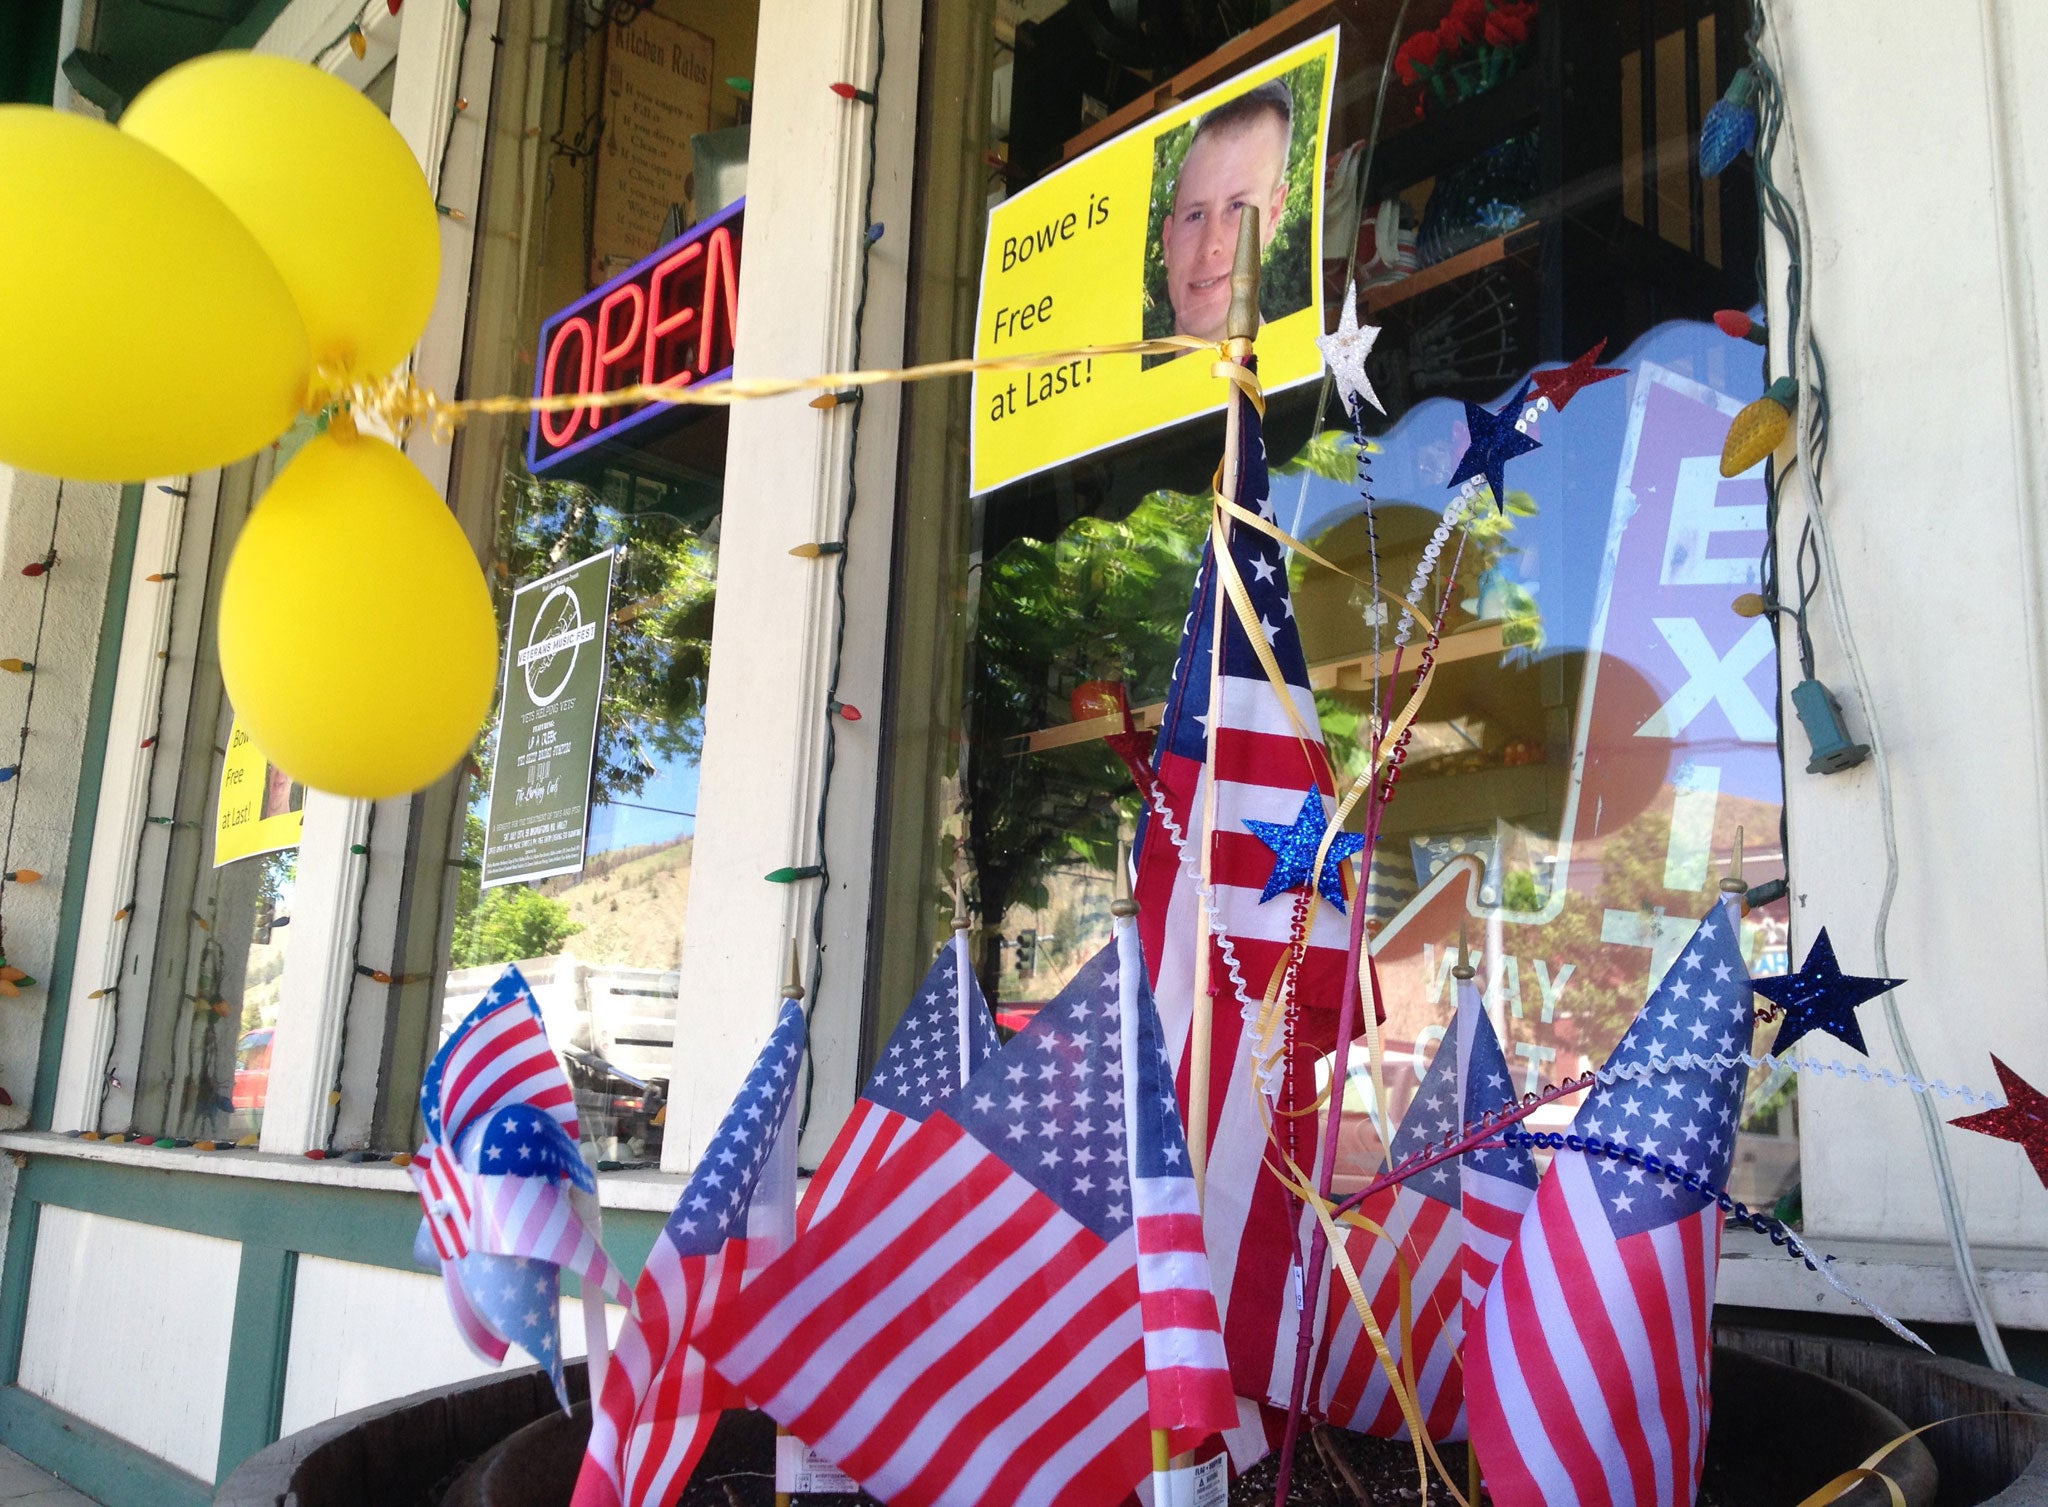 Flags and balloons marking the release from captivity of Sergeant Bowe Bergdahl adorn the sidewalk outside a shop in the soldier's hometown of Hailey, Idaho, Wednesday, June 4, 2014